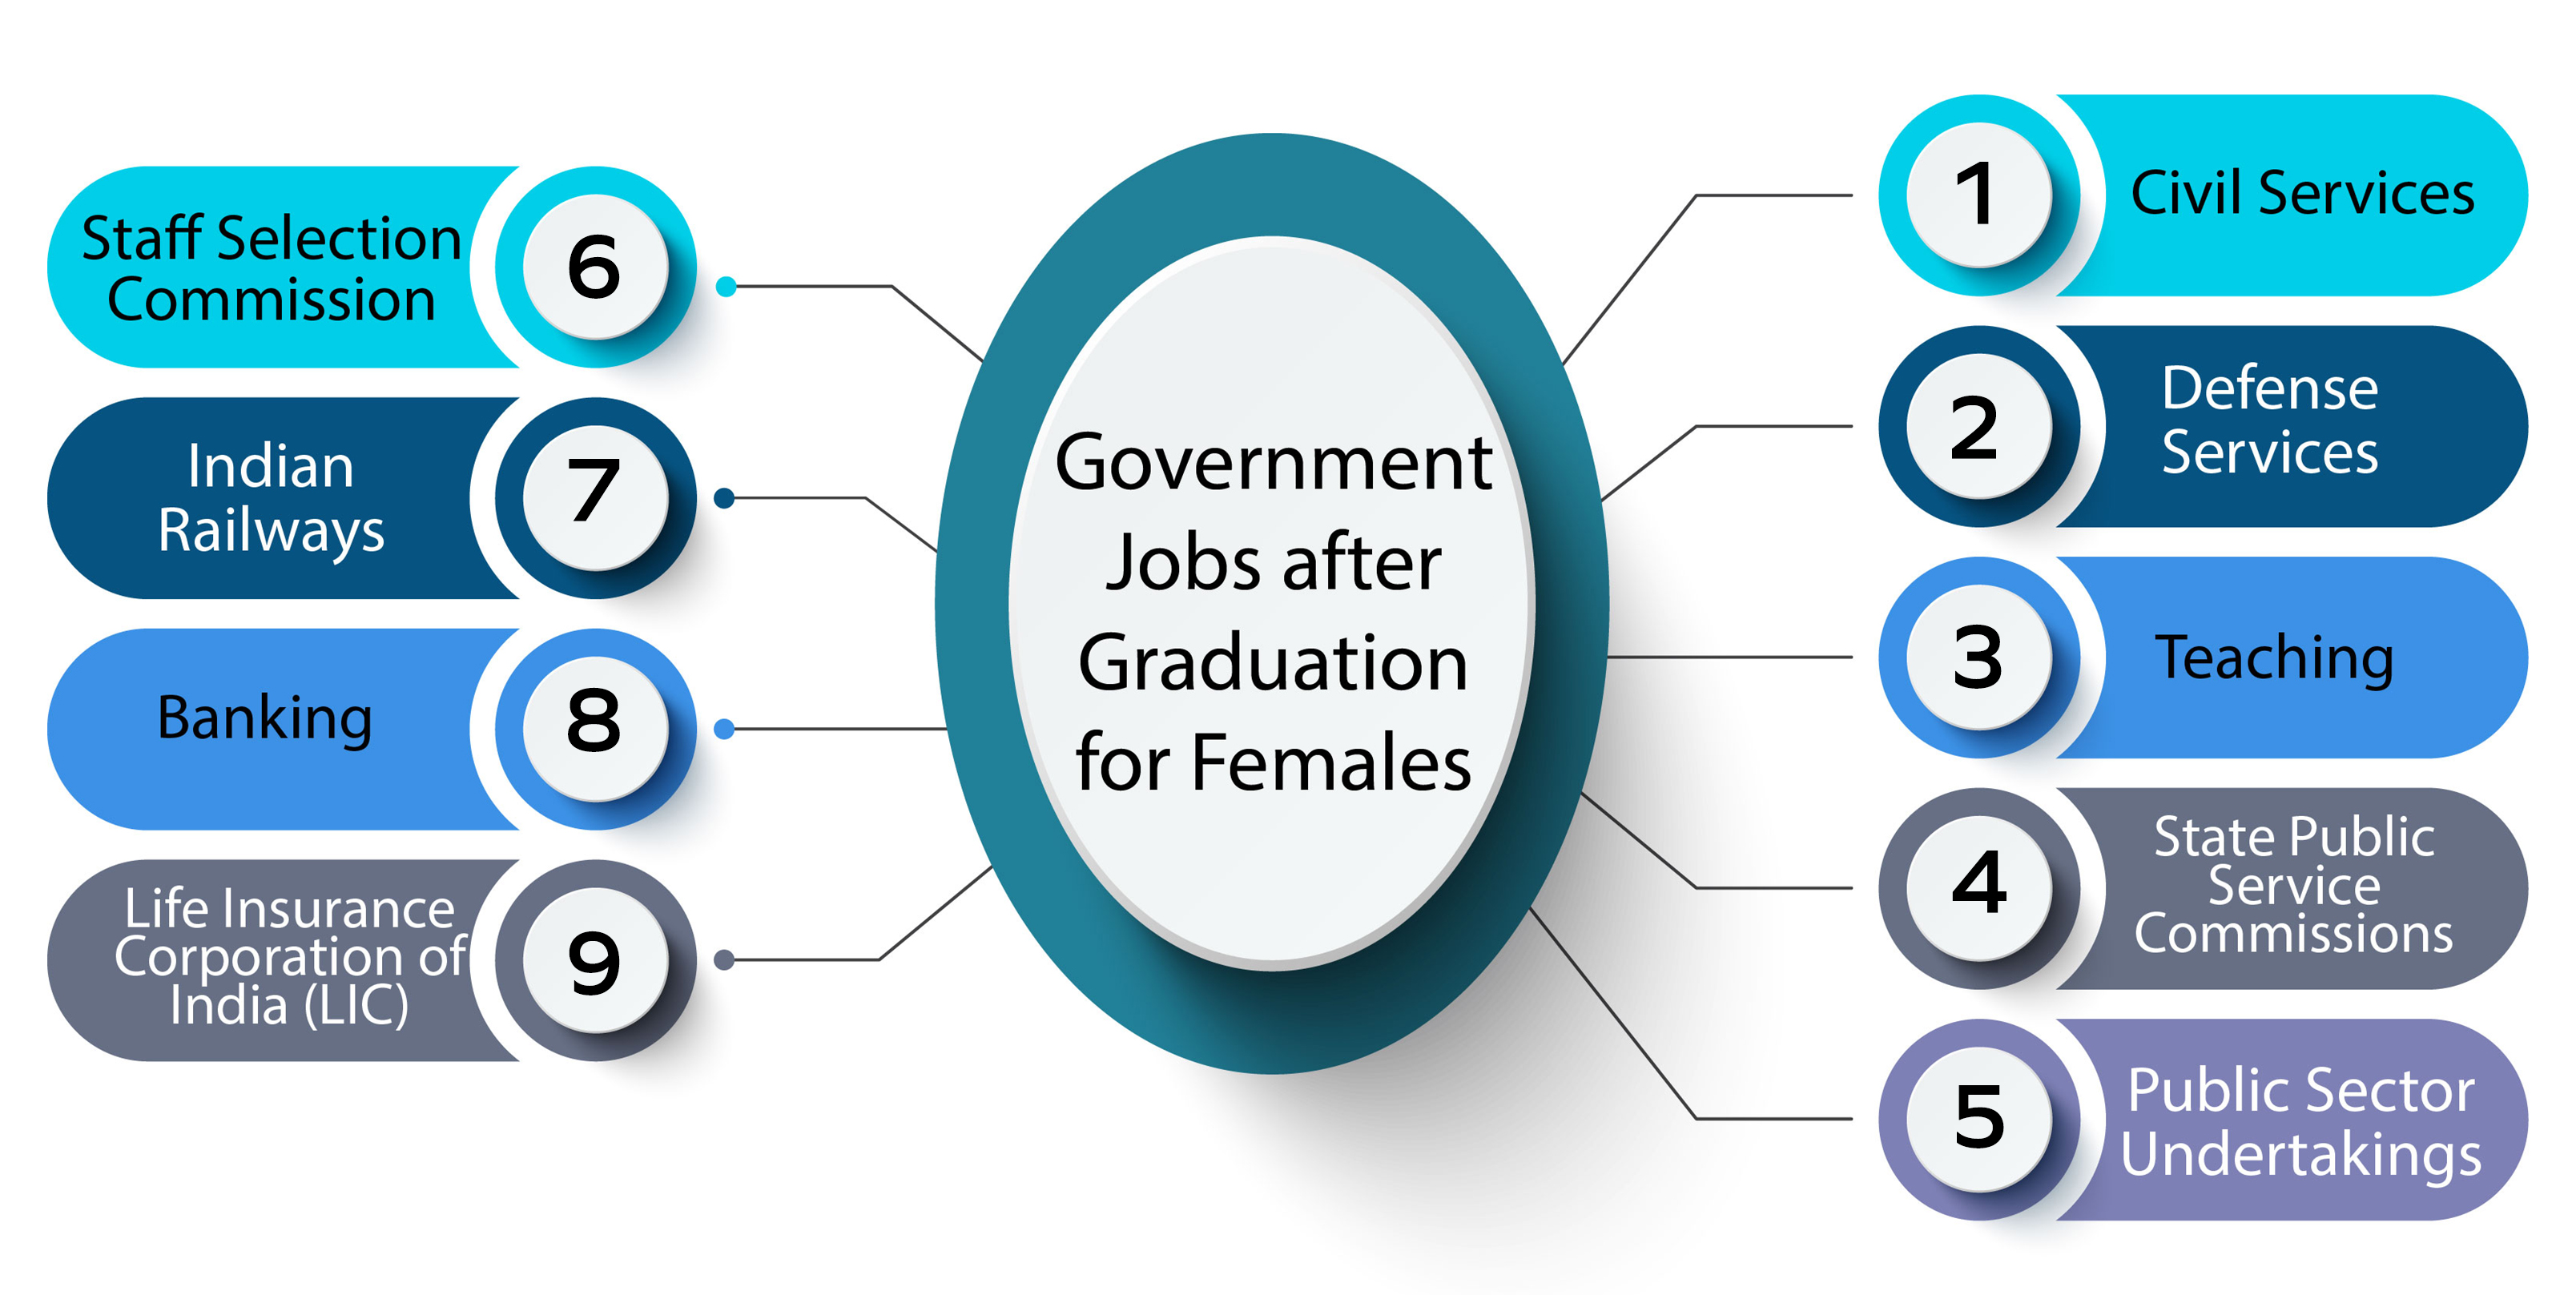 Government Jobs after Graduation for Females